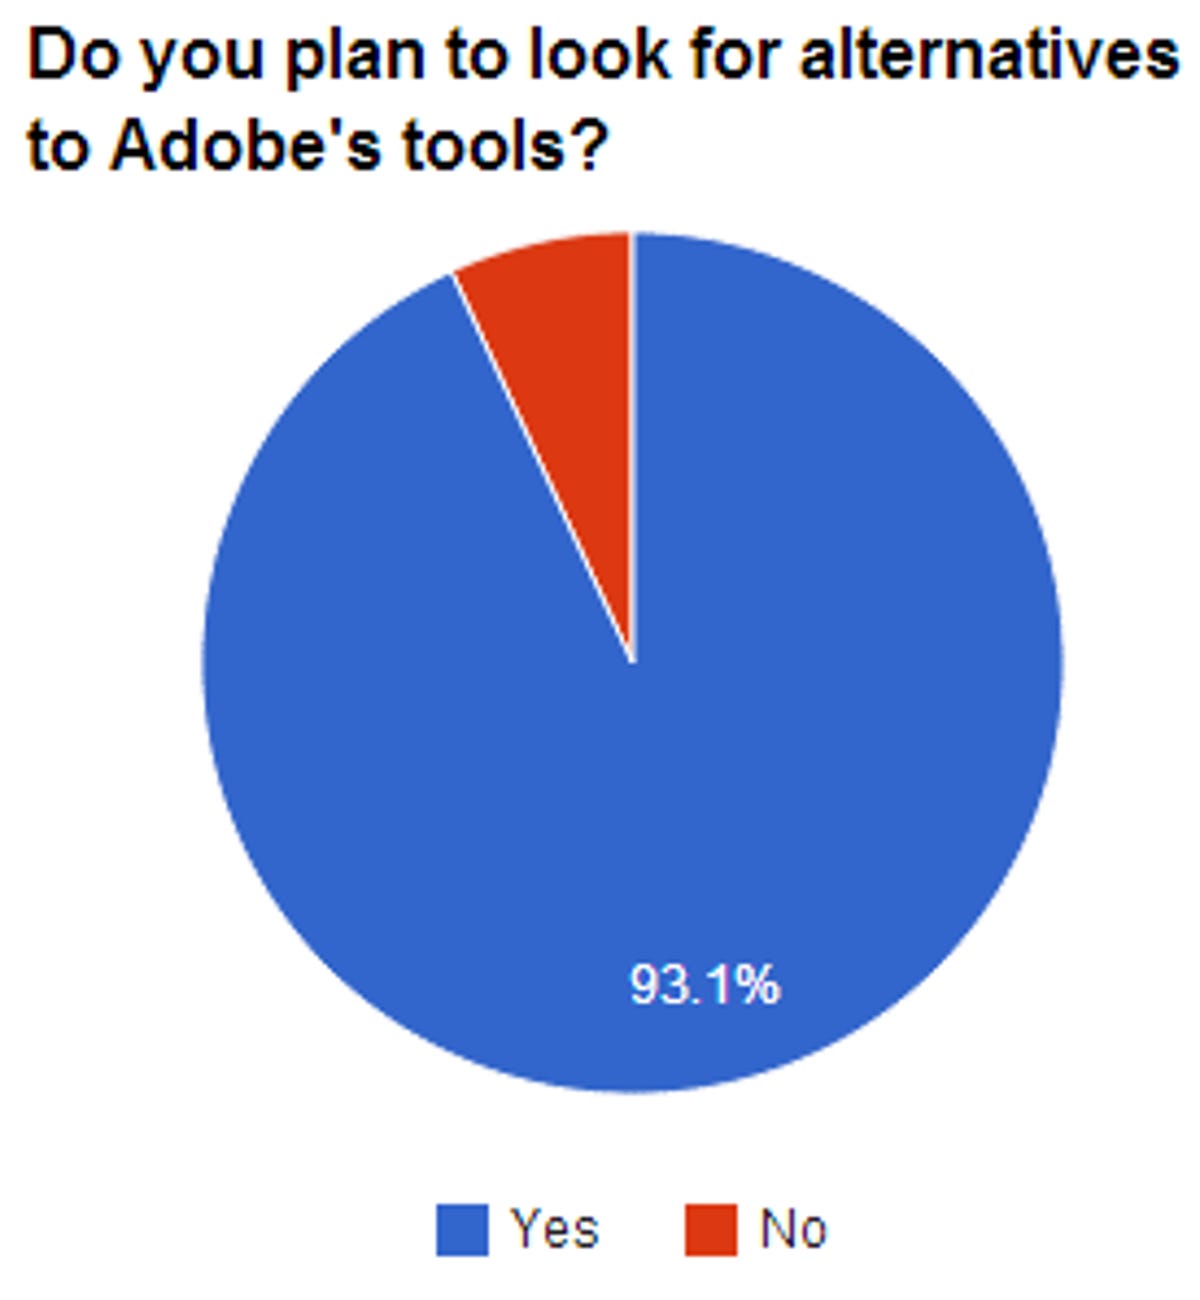 A vocal group has opposed Adobe's shift to subscriptions, and most respondents said they're looking at alternatives to Adobe software.